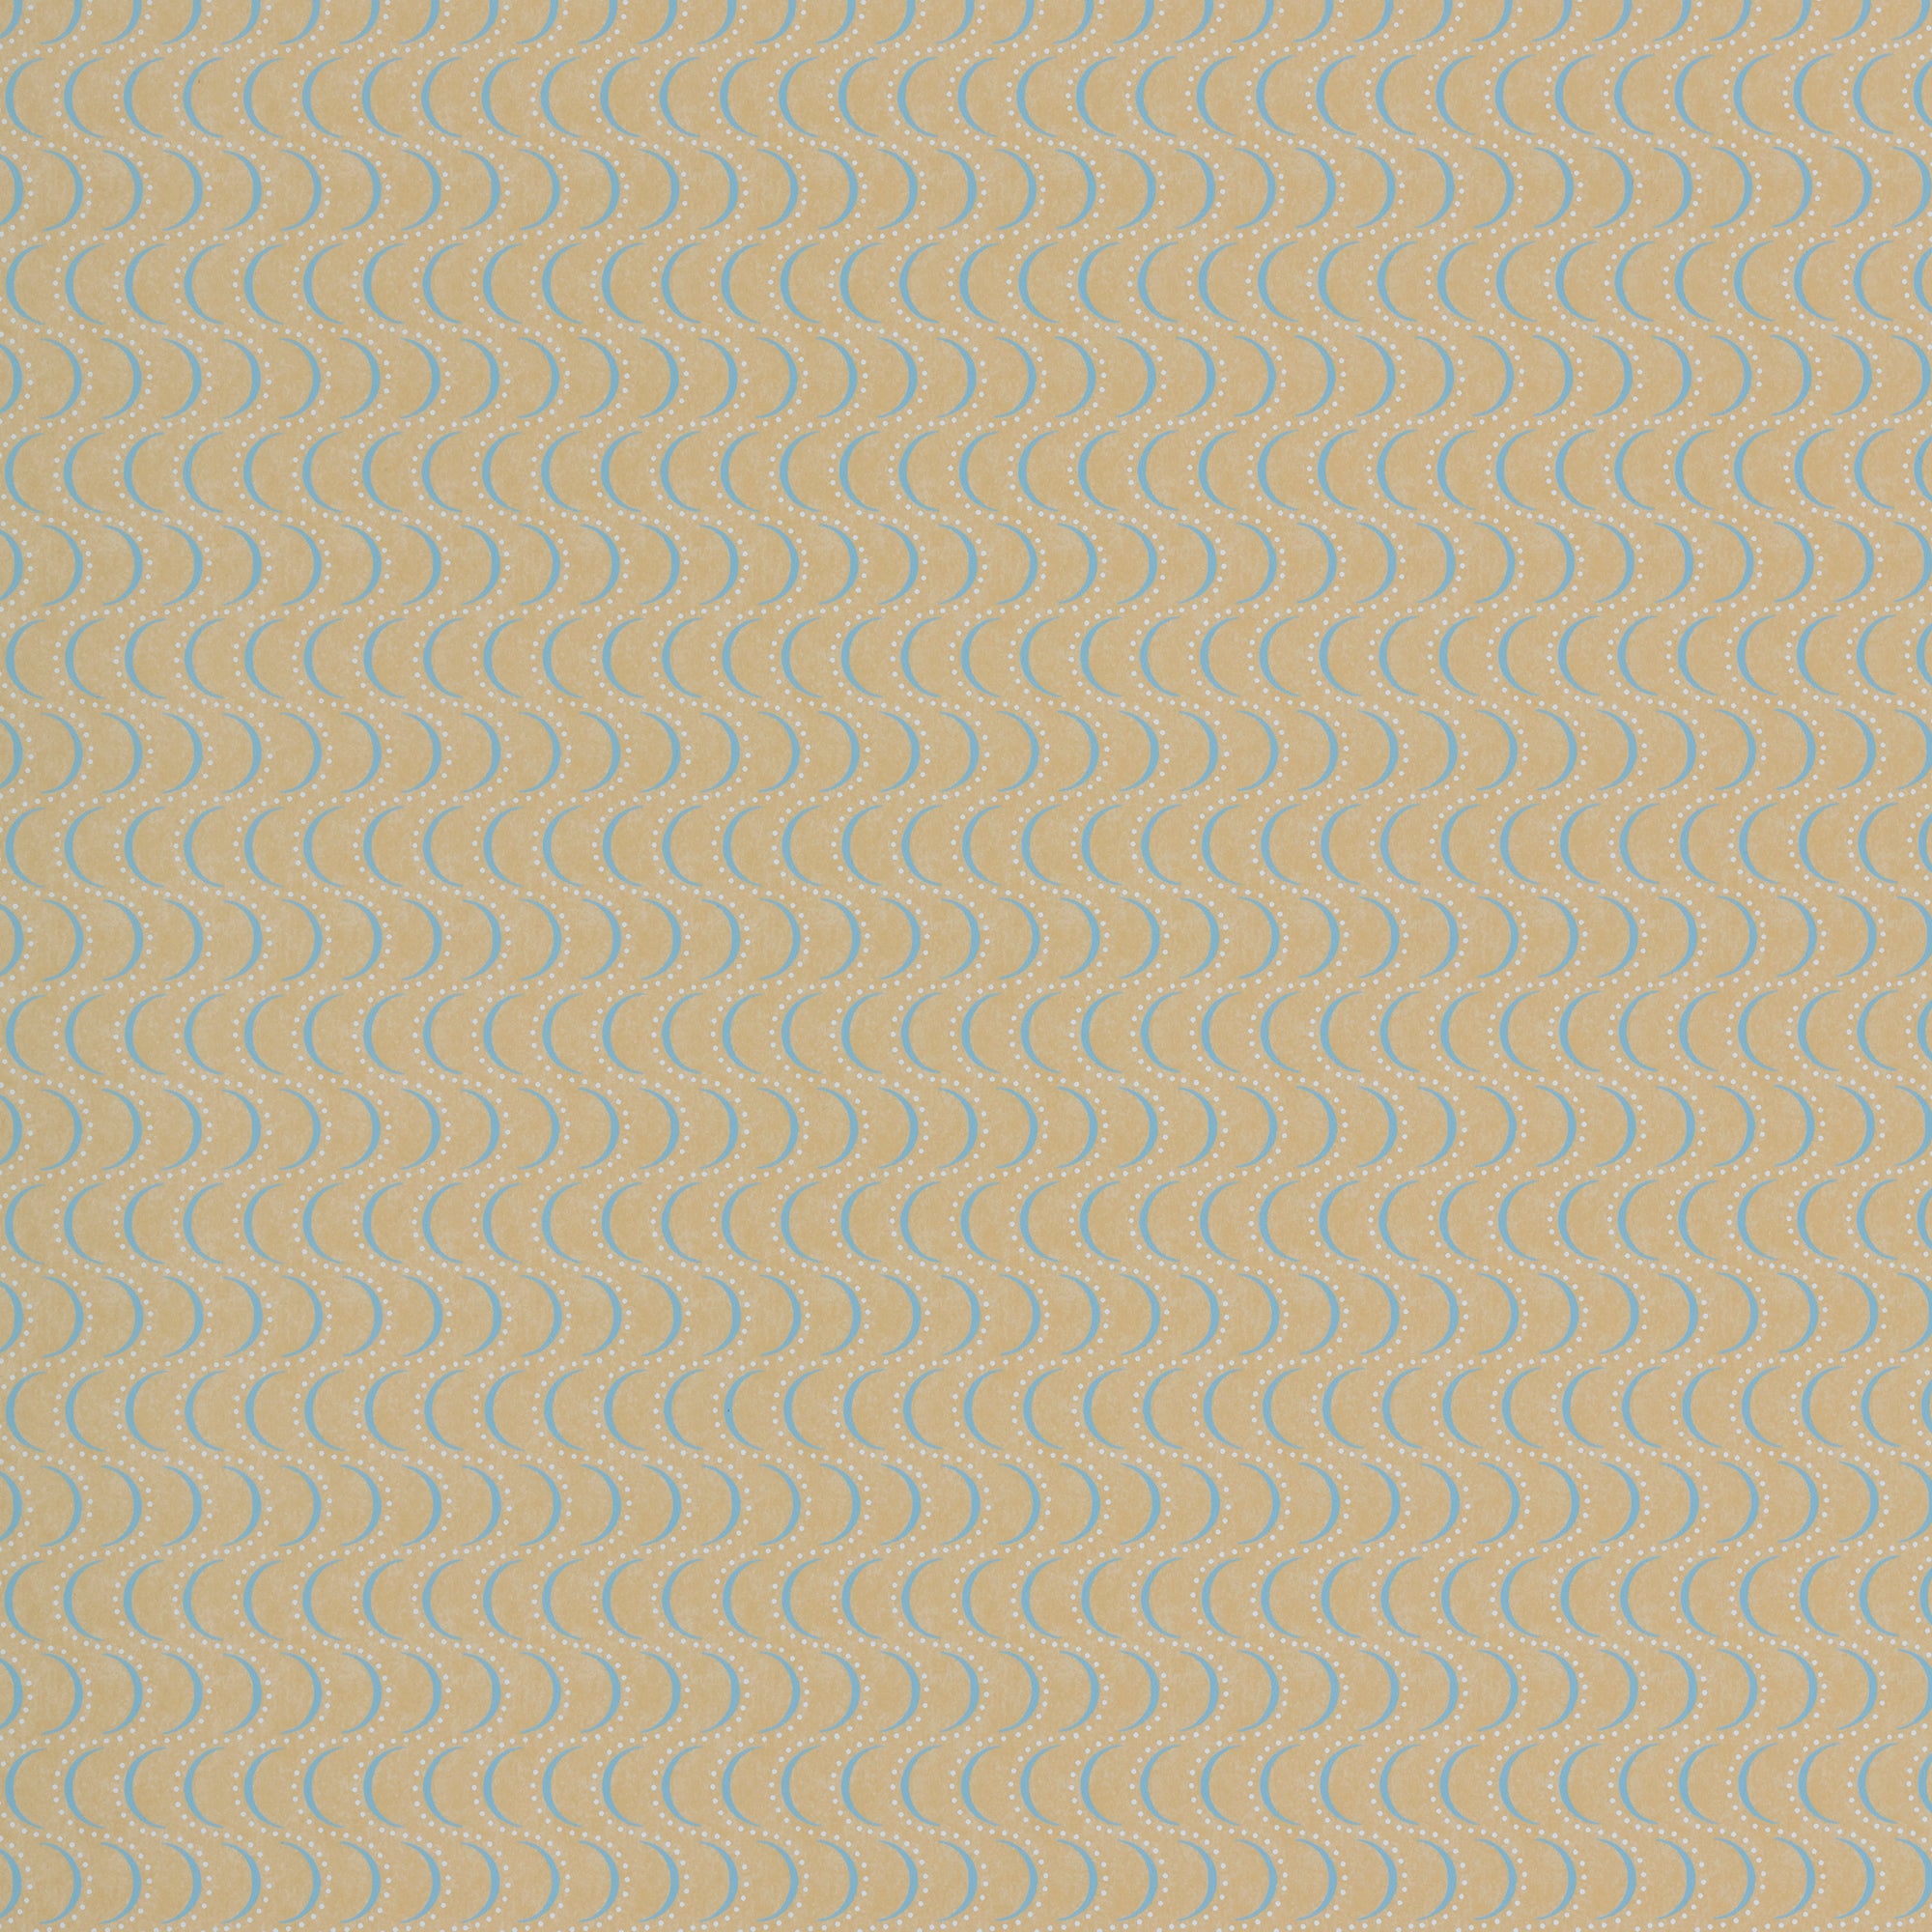 Wallpaper panel in an undulating stripe pattern in blue and white on a mustard field.